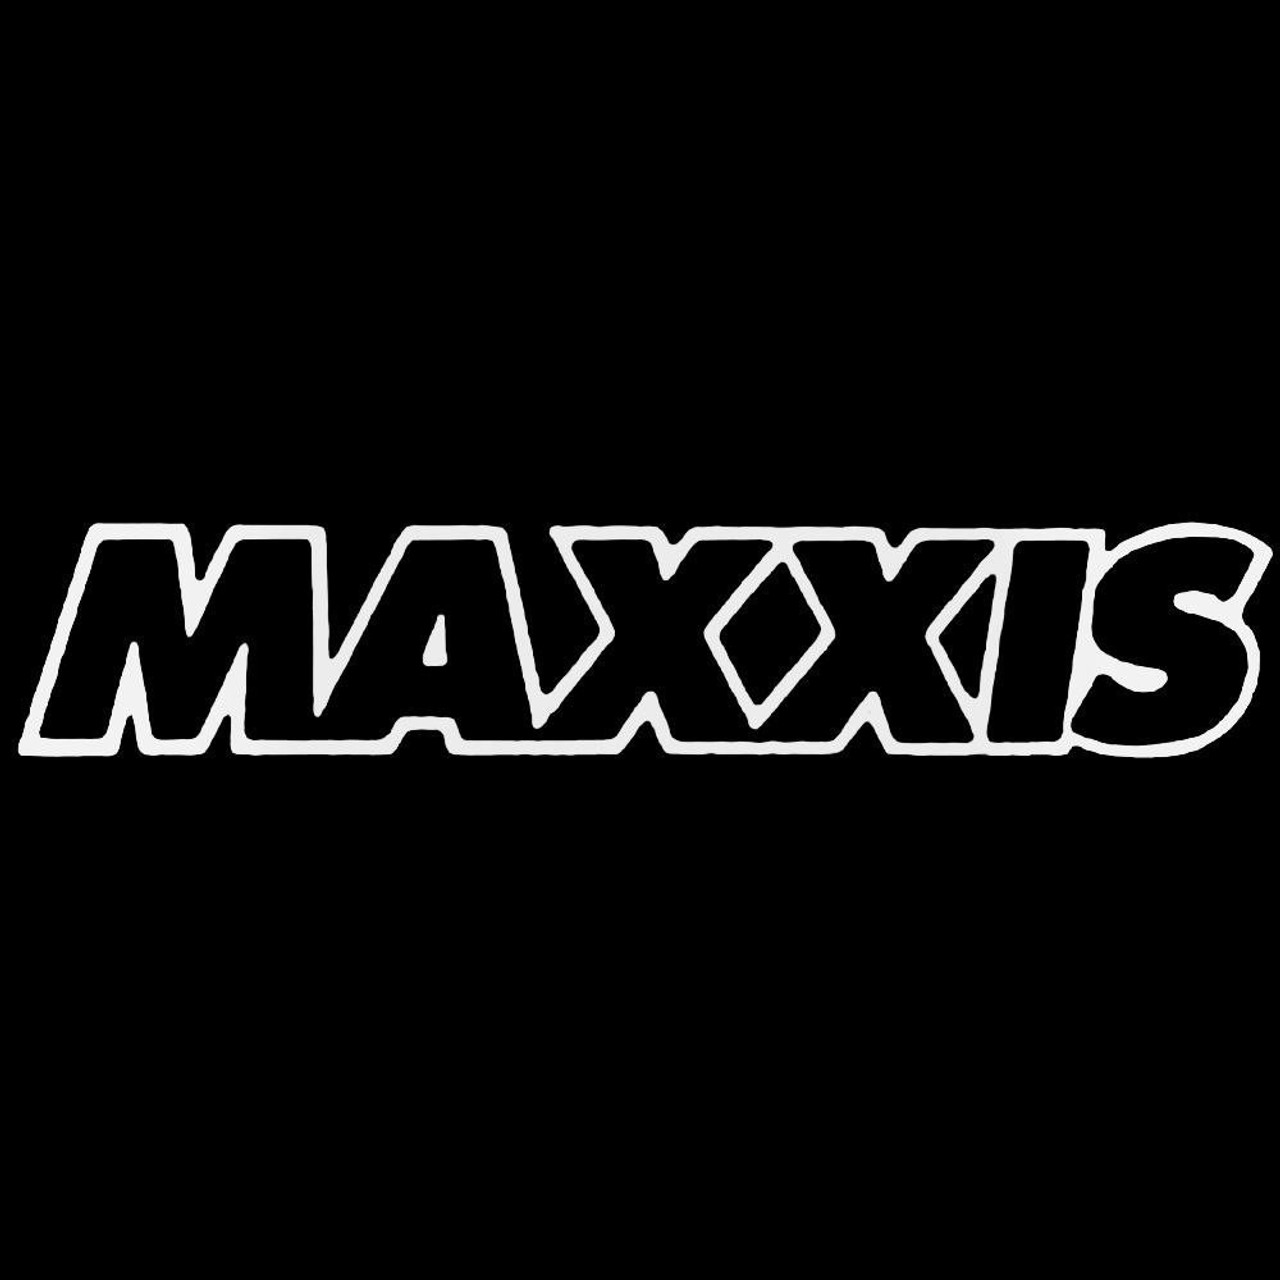 Maxxis Text Cycling Decal Sticker